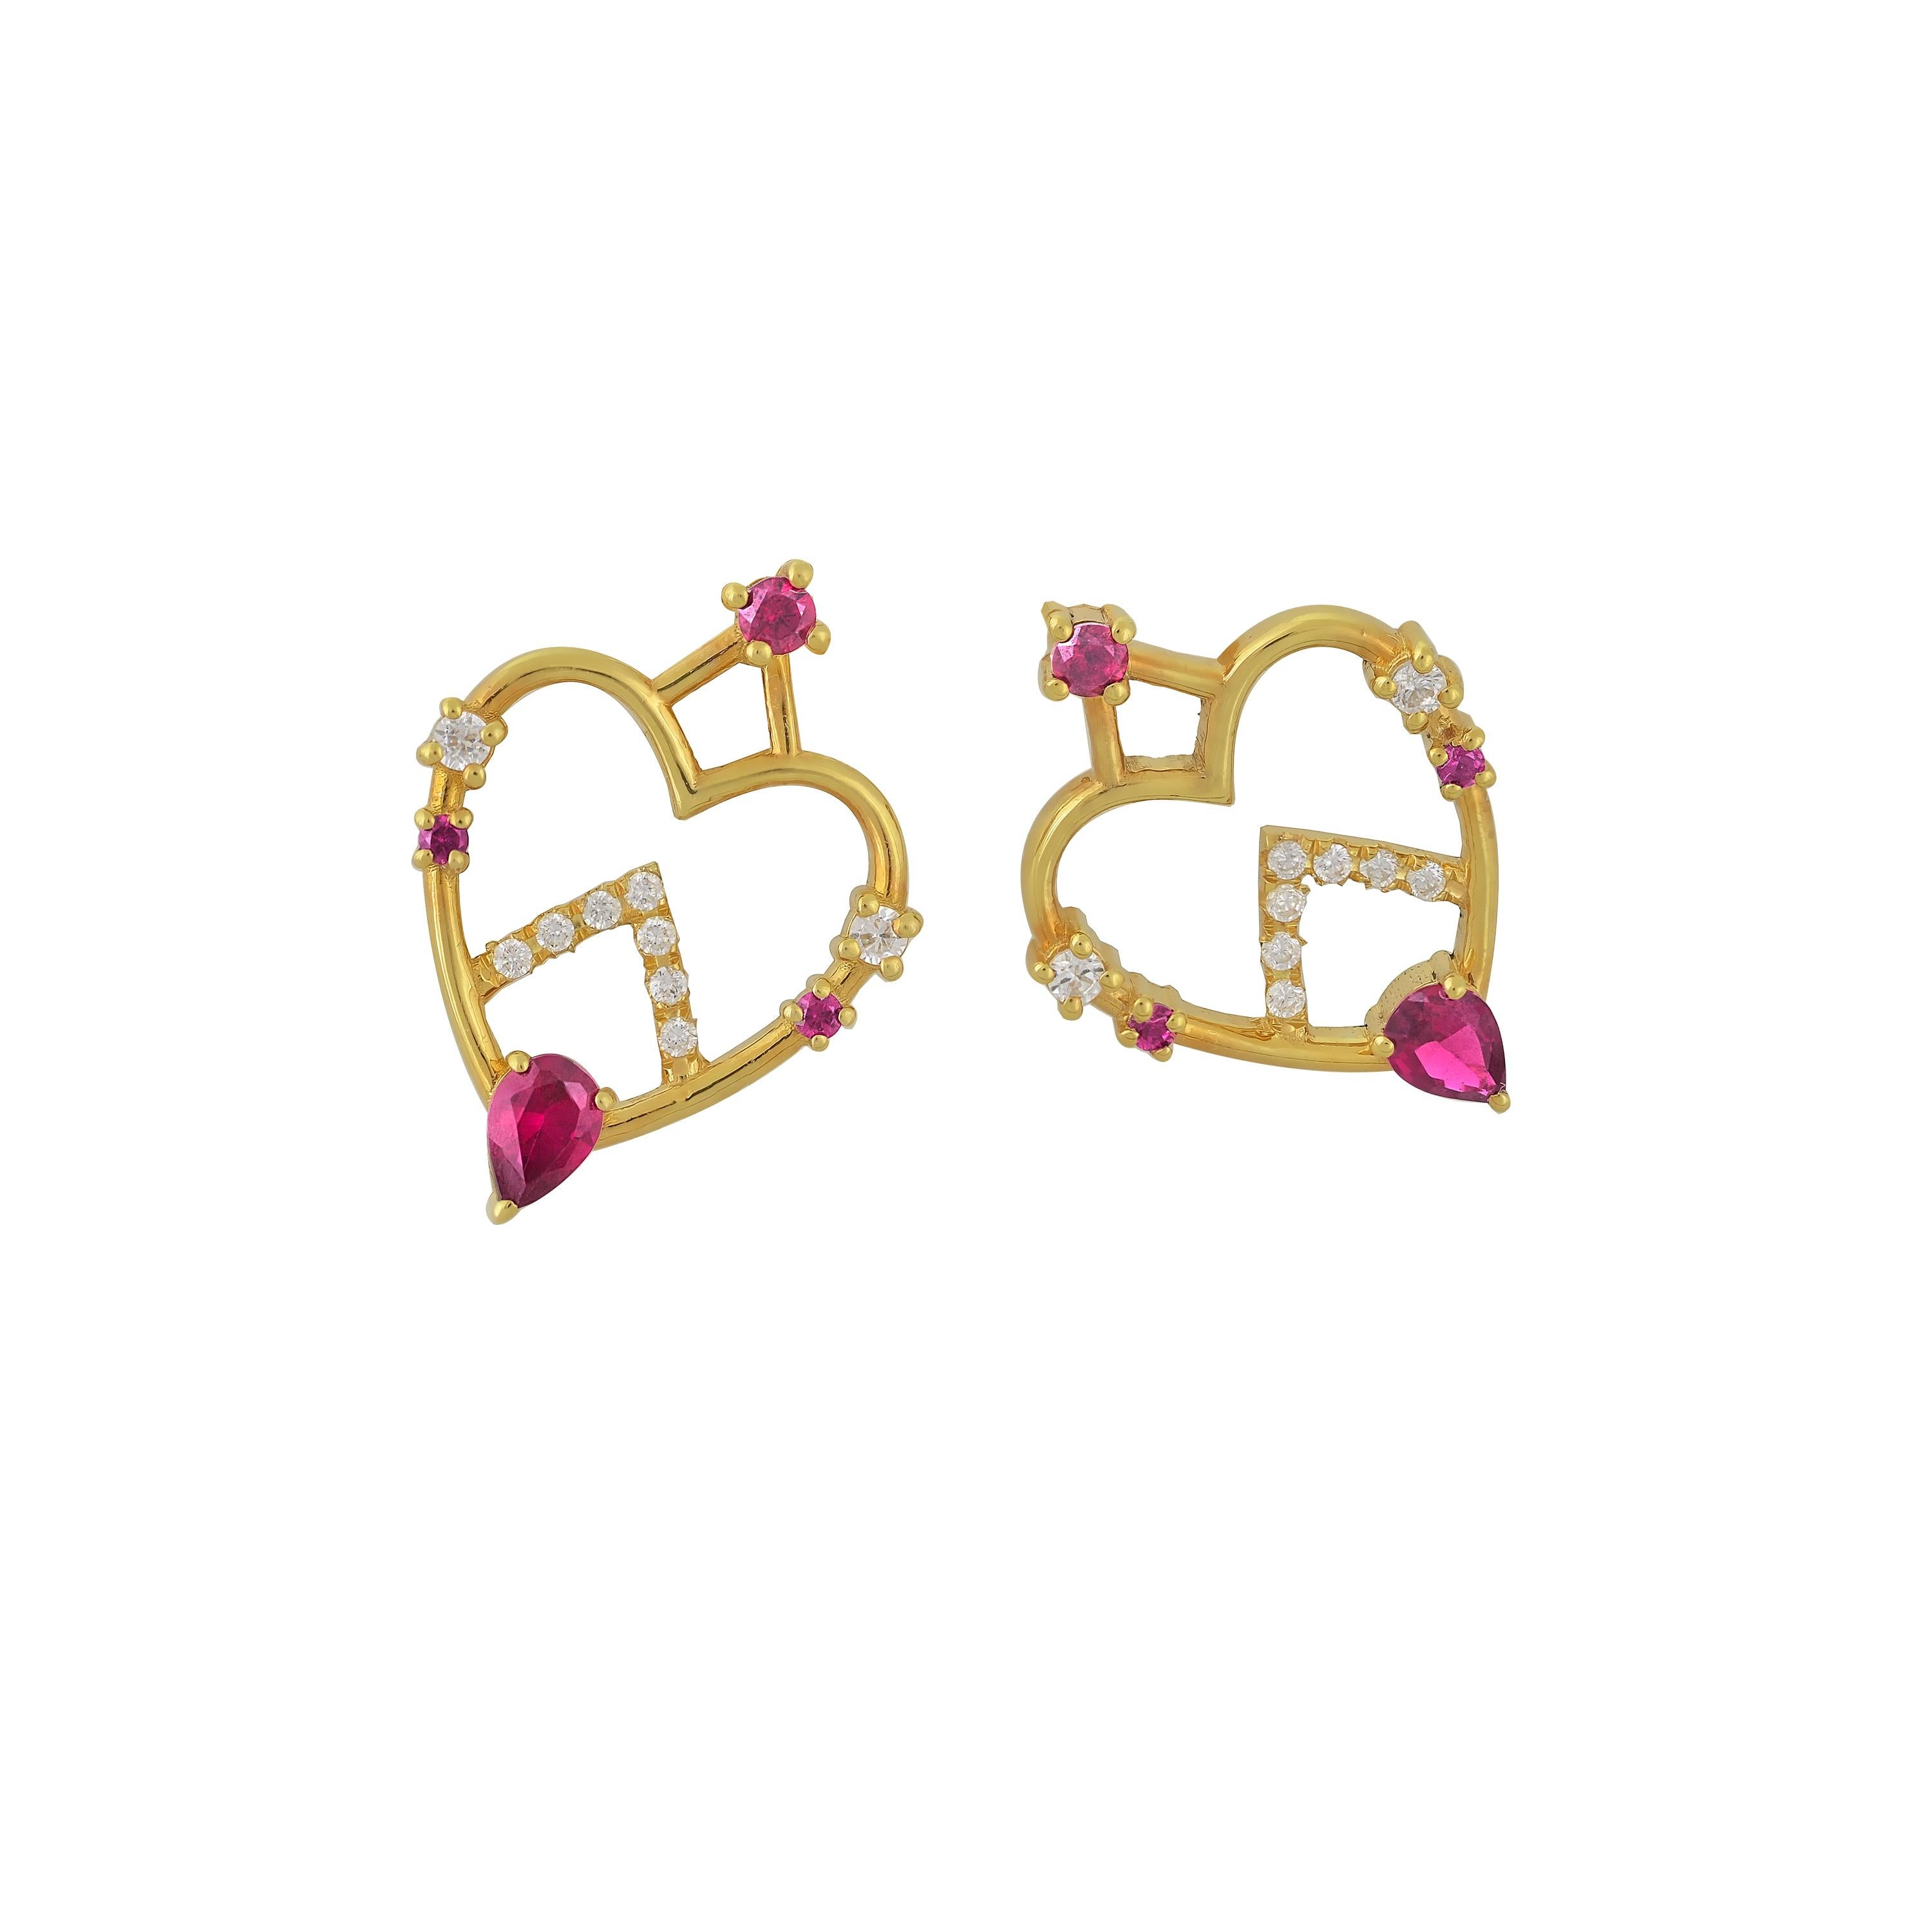 Designer: Alexia Gryllaki
Dimensions: L18x14mm
Weight: approximately 3.2g (pair)
Barcode: ING037E

The Interlocking Geometry earrings in 18 karat yellow gold with rubies approx. 0.58cts and round brilliant-cut diamonds approx. 0.13cts.

About the